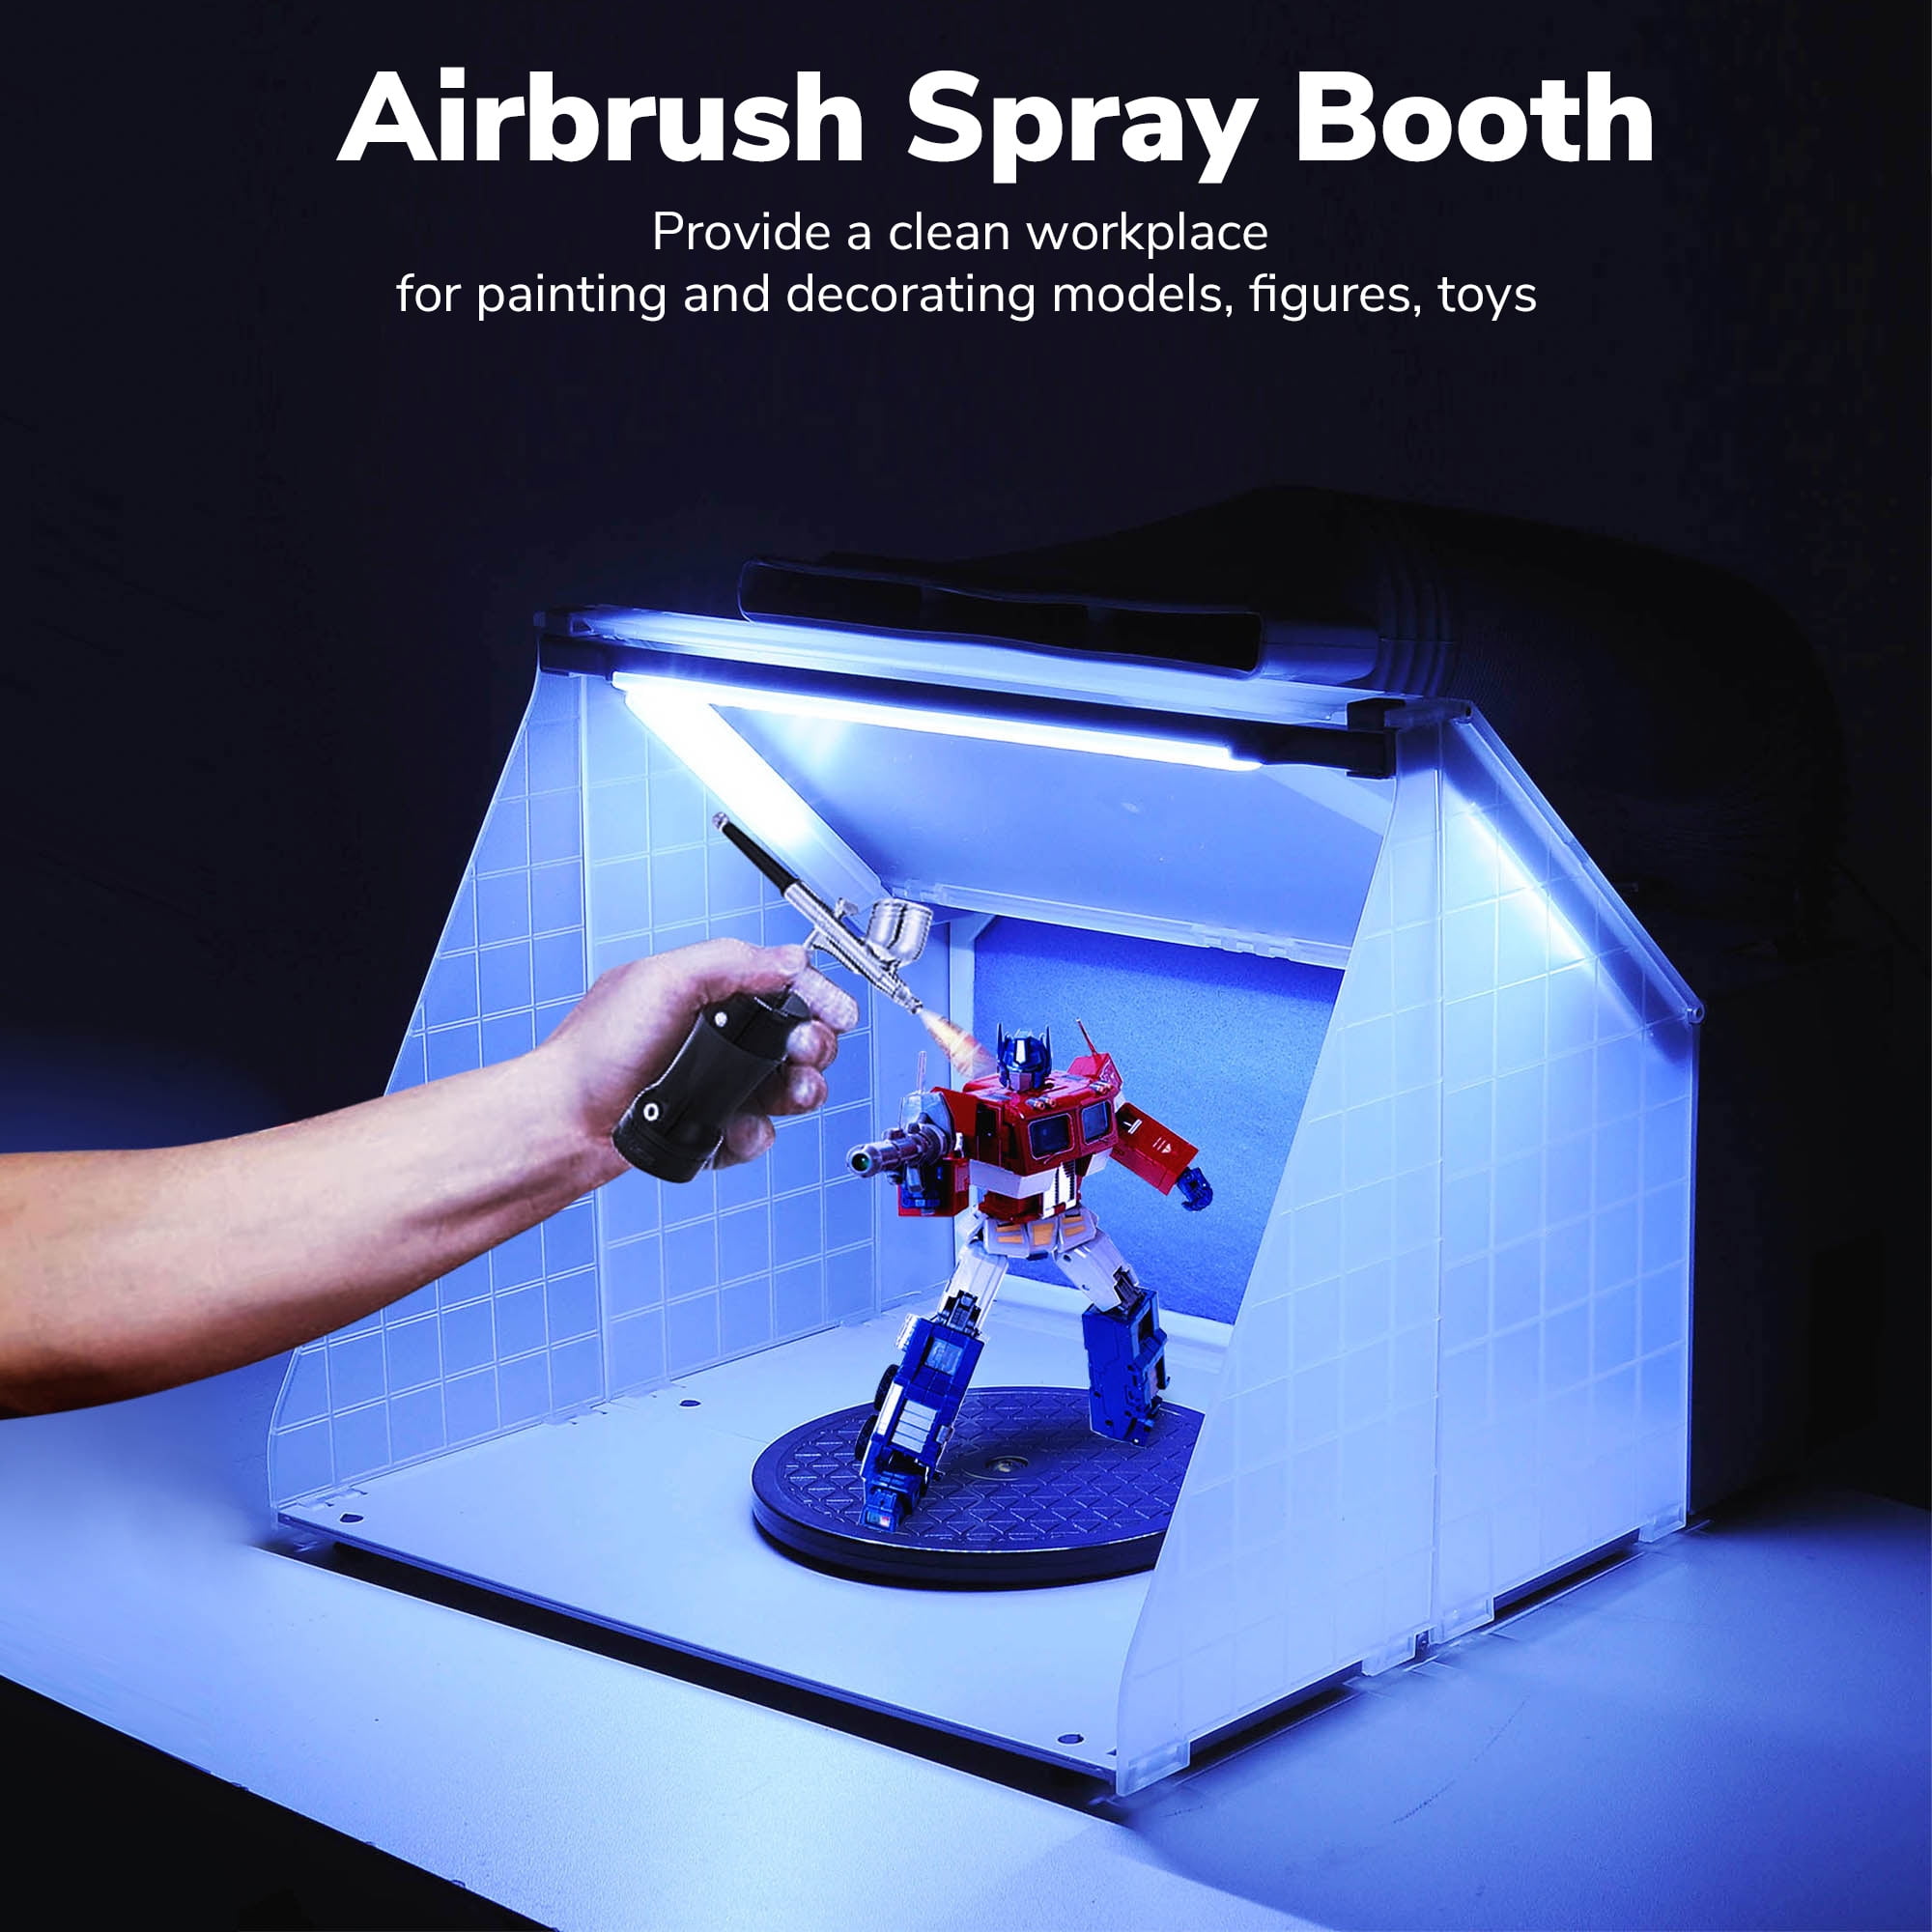 Bulldog Liquidators Valencia on Instagram: Airbrush Spray Booth with  Exhaust Fan - Portable Airbrush Paint Booth with Filter LED Lights, Air  Brush Kit for Model Painting, Hobby Painting, Crafts, Cake, T-Shirt DIY